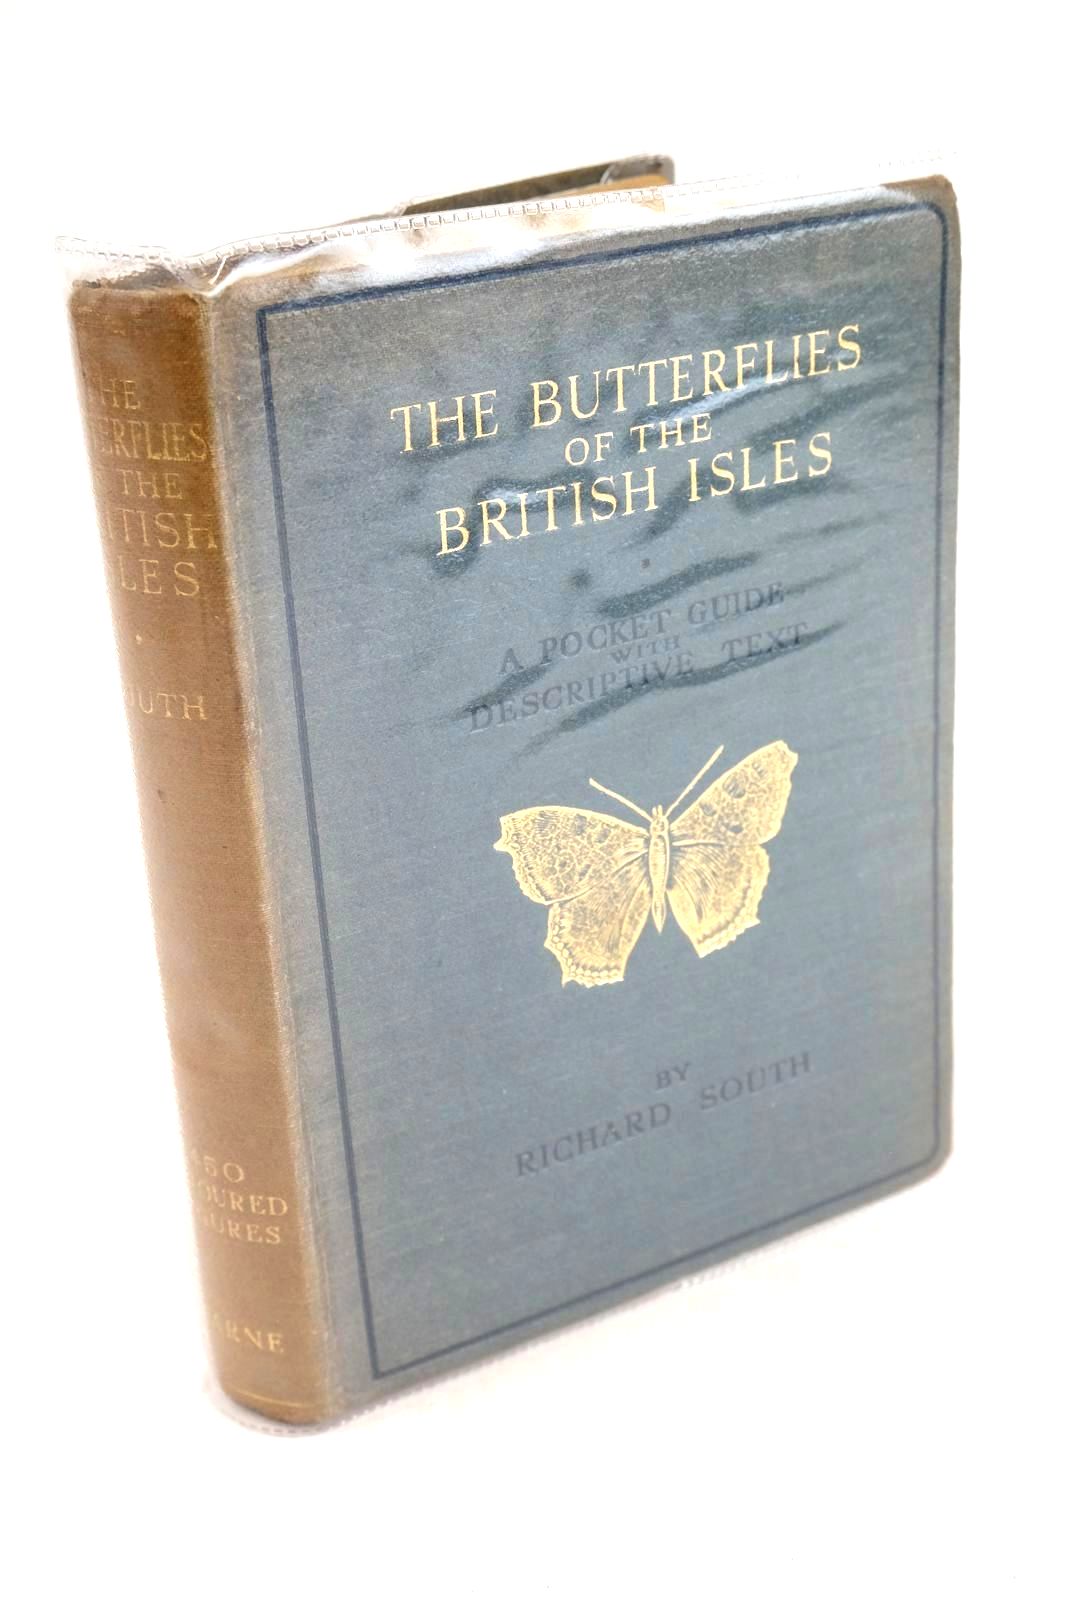 Photo of THE BUTTERFLIES OF THE BRITISH ISLES written by South, Richard published by Frederick Warne &amp; Co Ltd. (STOCK CODE: 1326418)  for sale by Stella & Rose's Books